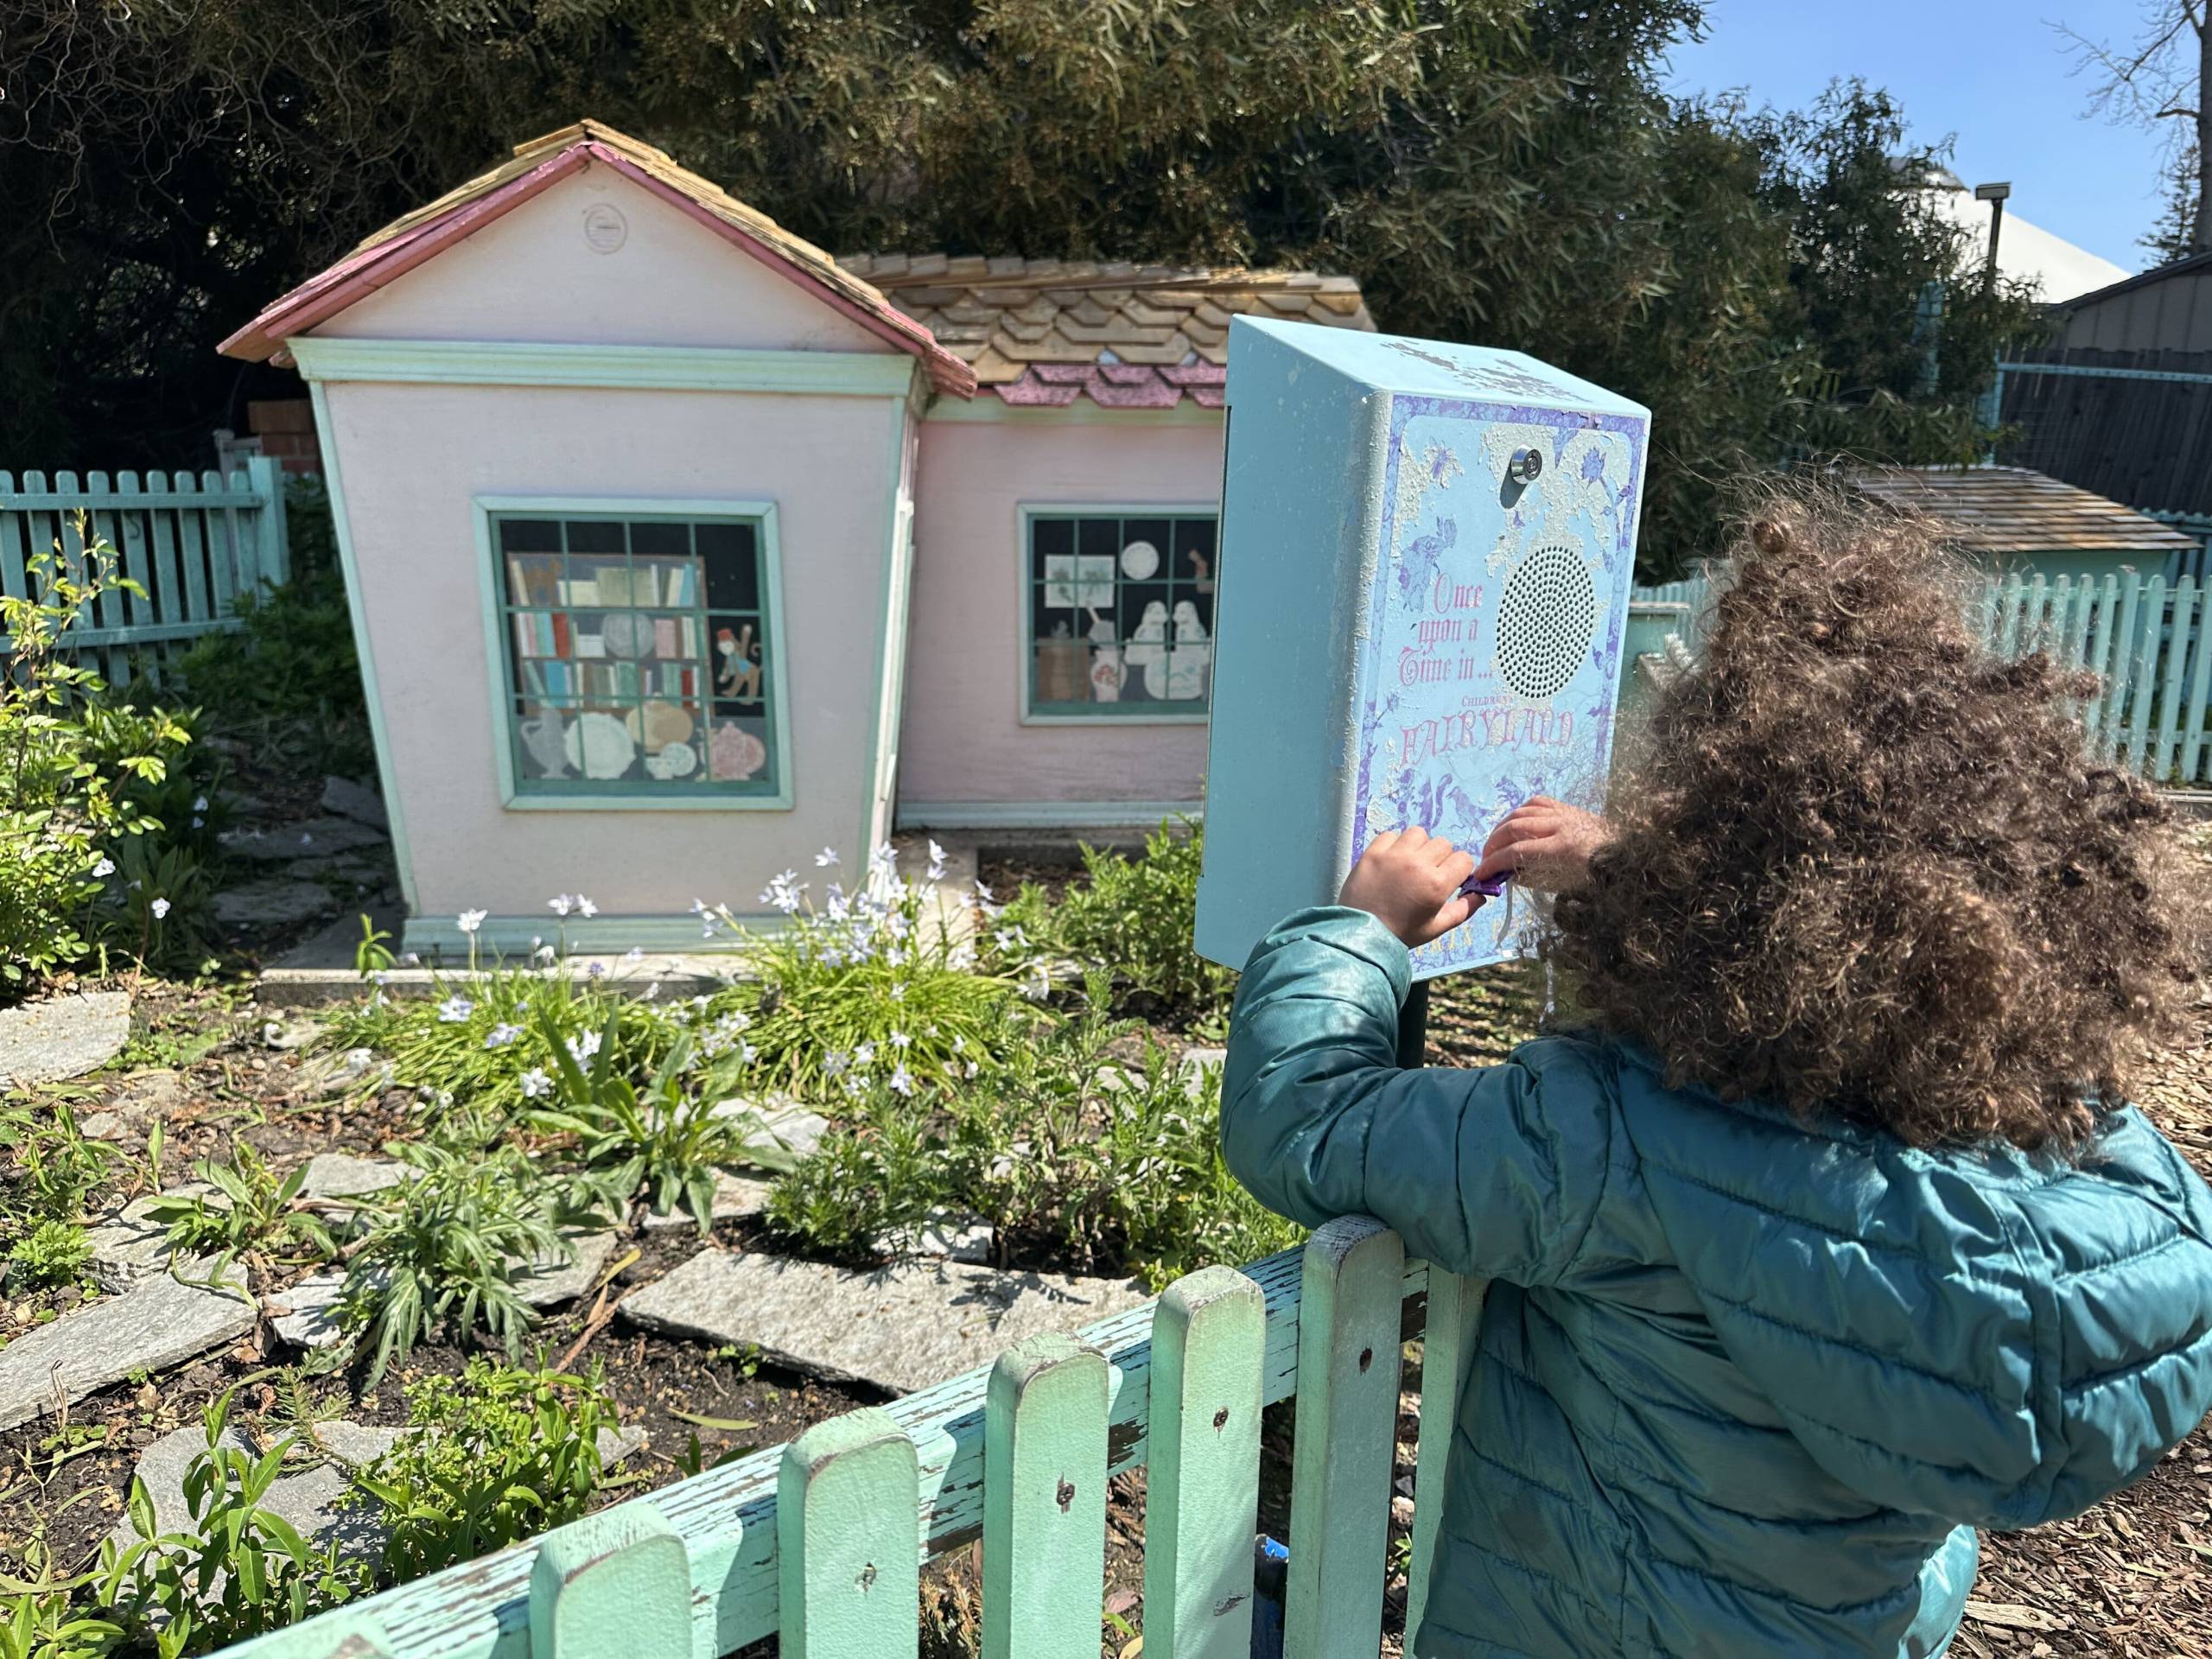 A little kid, around age 6, with poofy, coily hair and a blue puffer jacket turns a key in a light-blue wooden box. Beyond the box, which sits atop a turquoise-painted fence, is a little, light-pink house and flowers blooming amid paving stones.